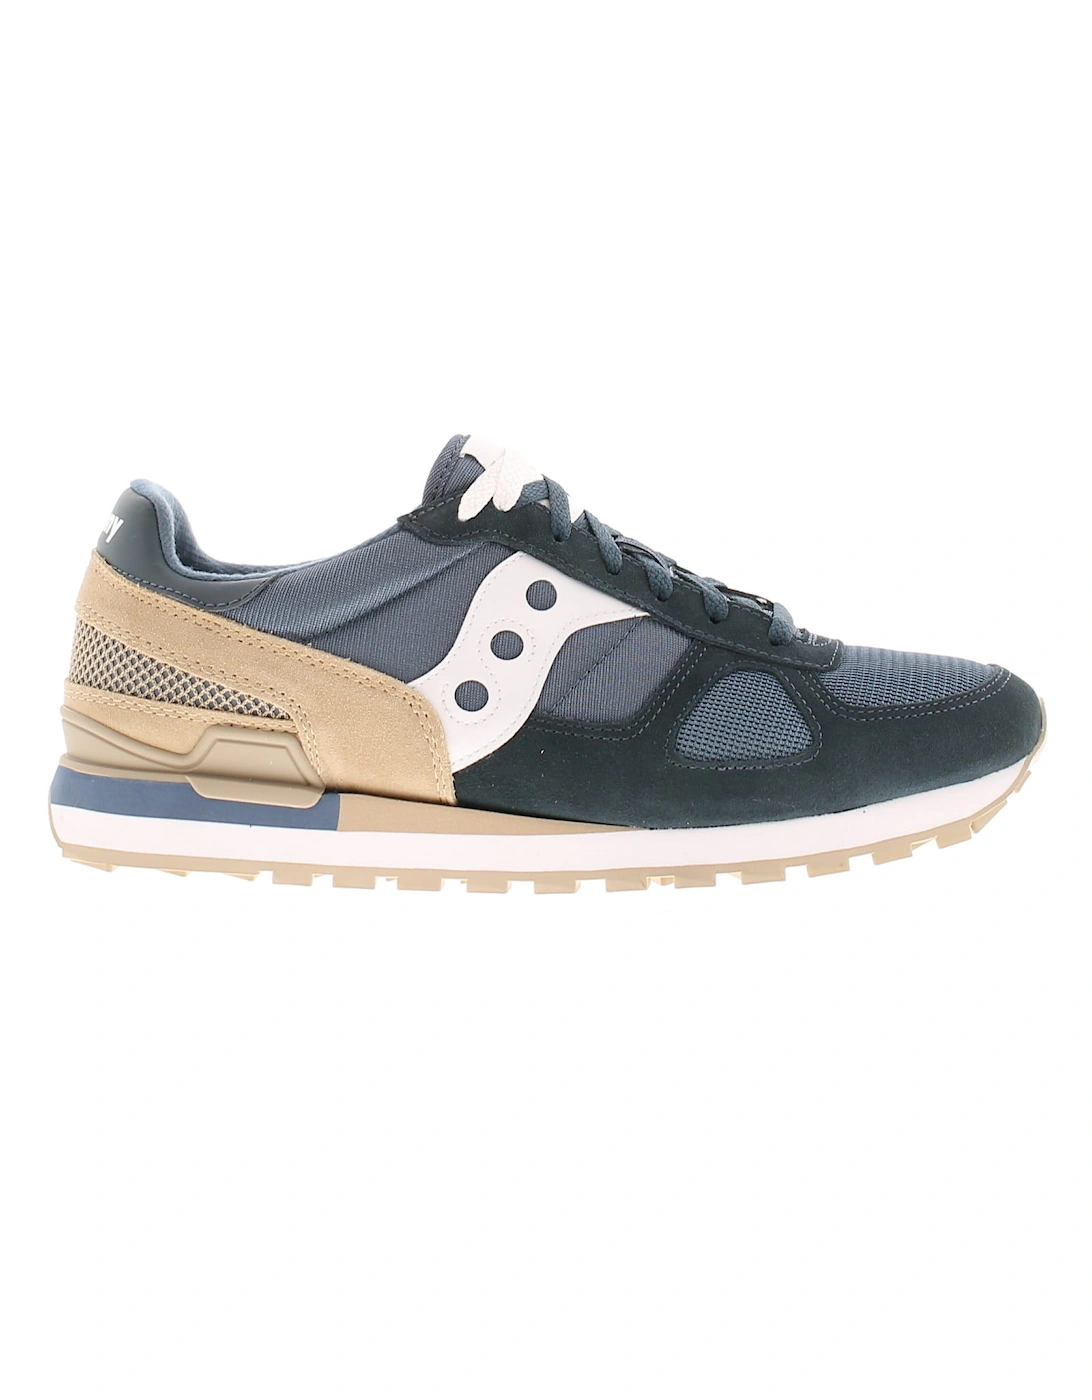 Mens Retro Trainers Shadow Original Lace Up navy sand UK Size